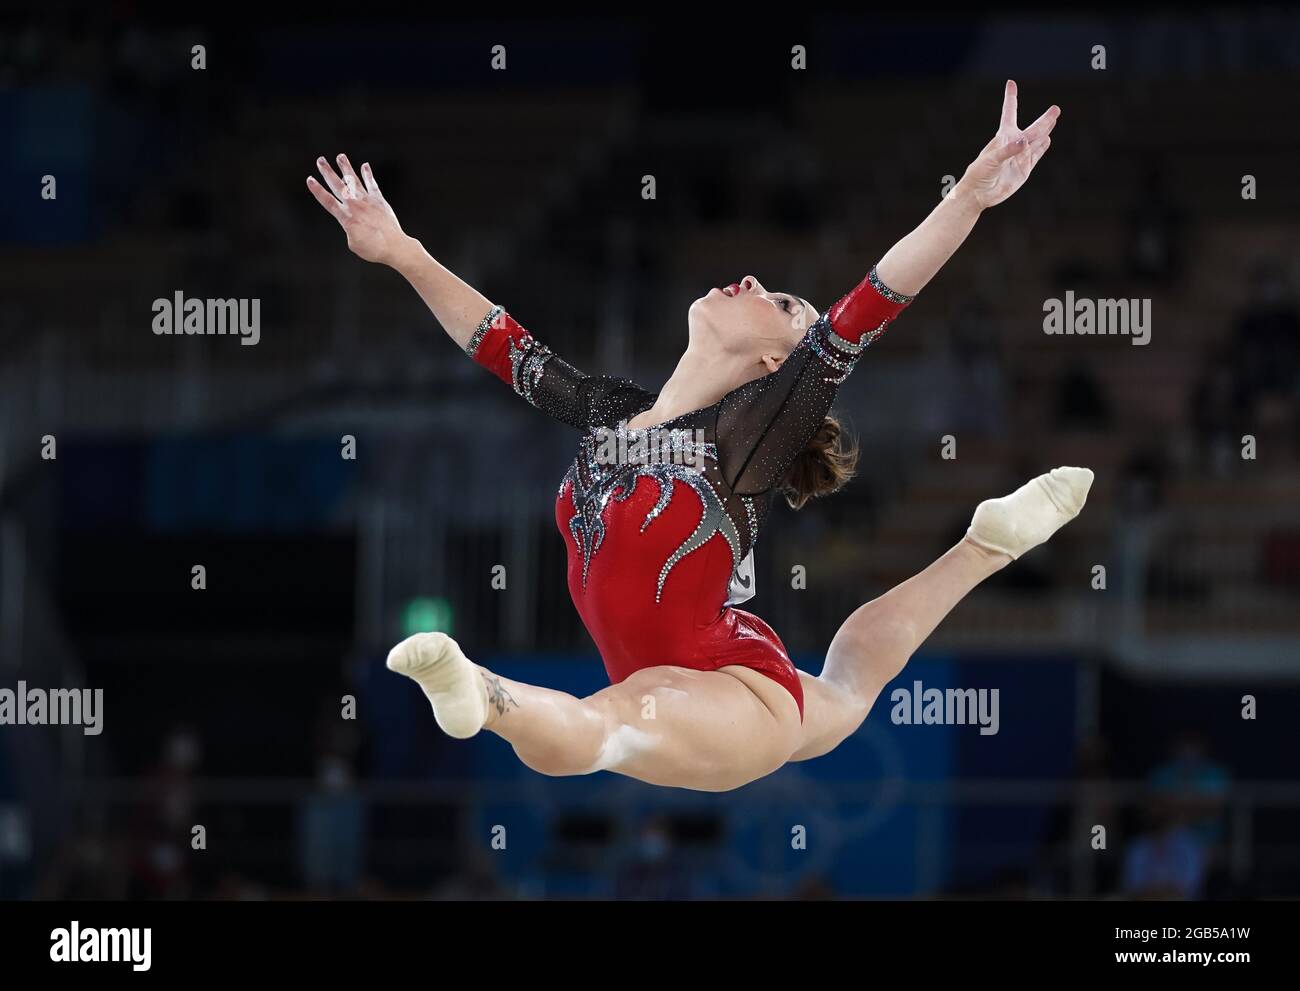 Tokyo, Japan. 2nd Aug, 2021. Vanessa Ferrari of Italy competes during the artistic gymnastics women's floor exercise final at the Tokyo 2020 Olympic Games in Tokyo, Japan, Aug. 2, 2021. Credit: Cheng Min/Xinhua/Alamy Live News Stock Photo